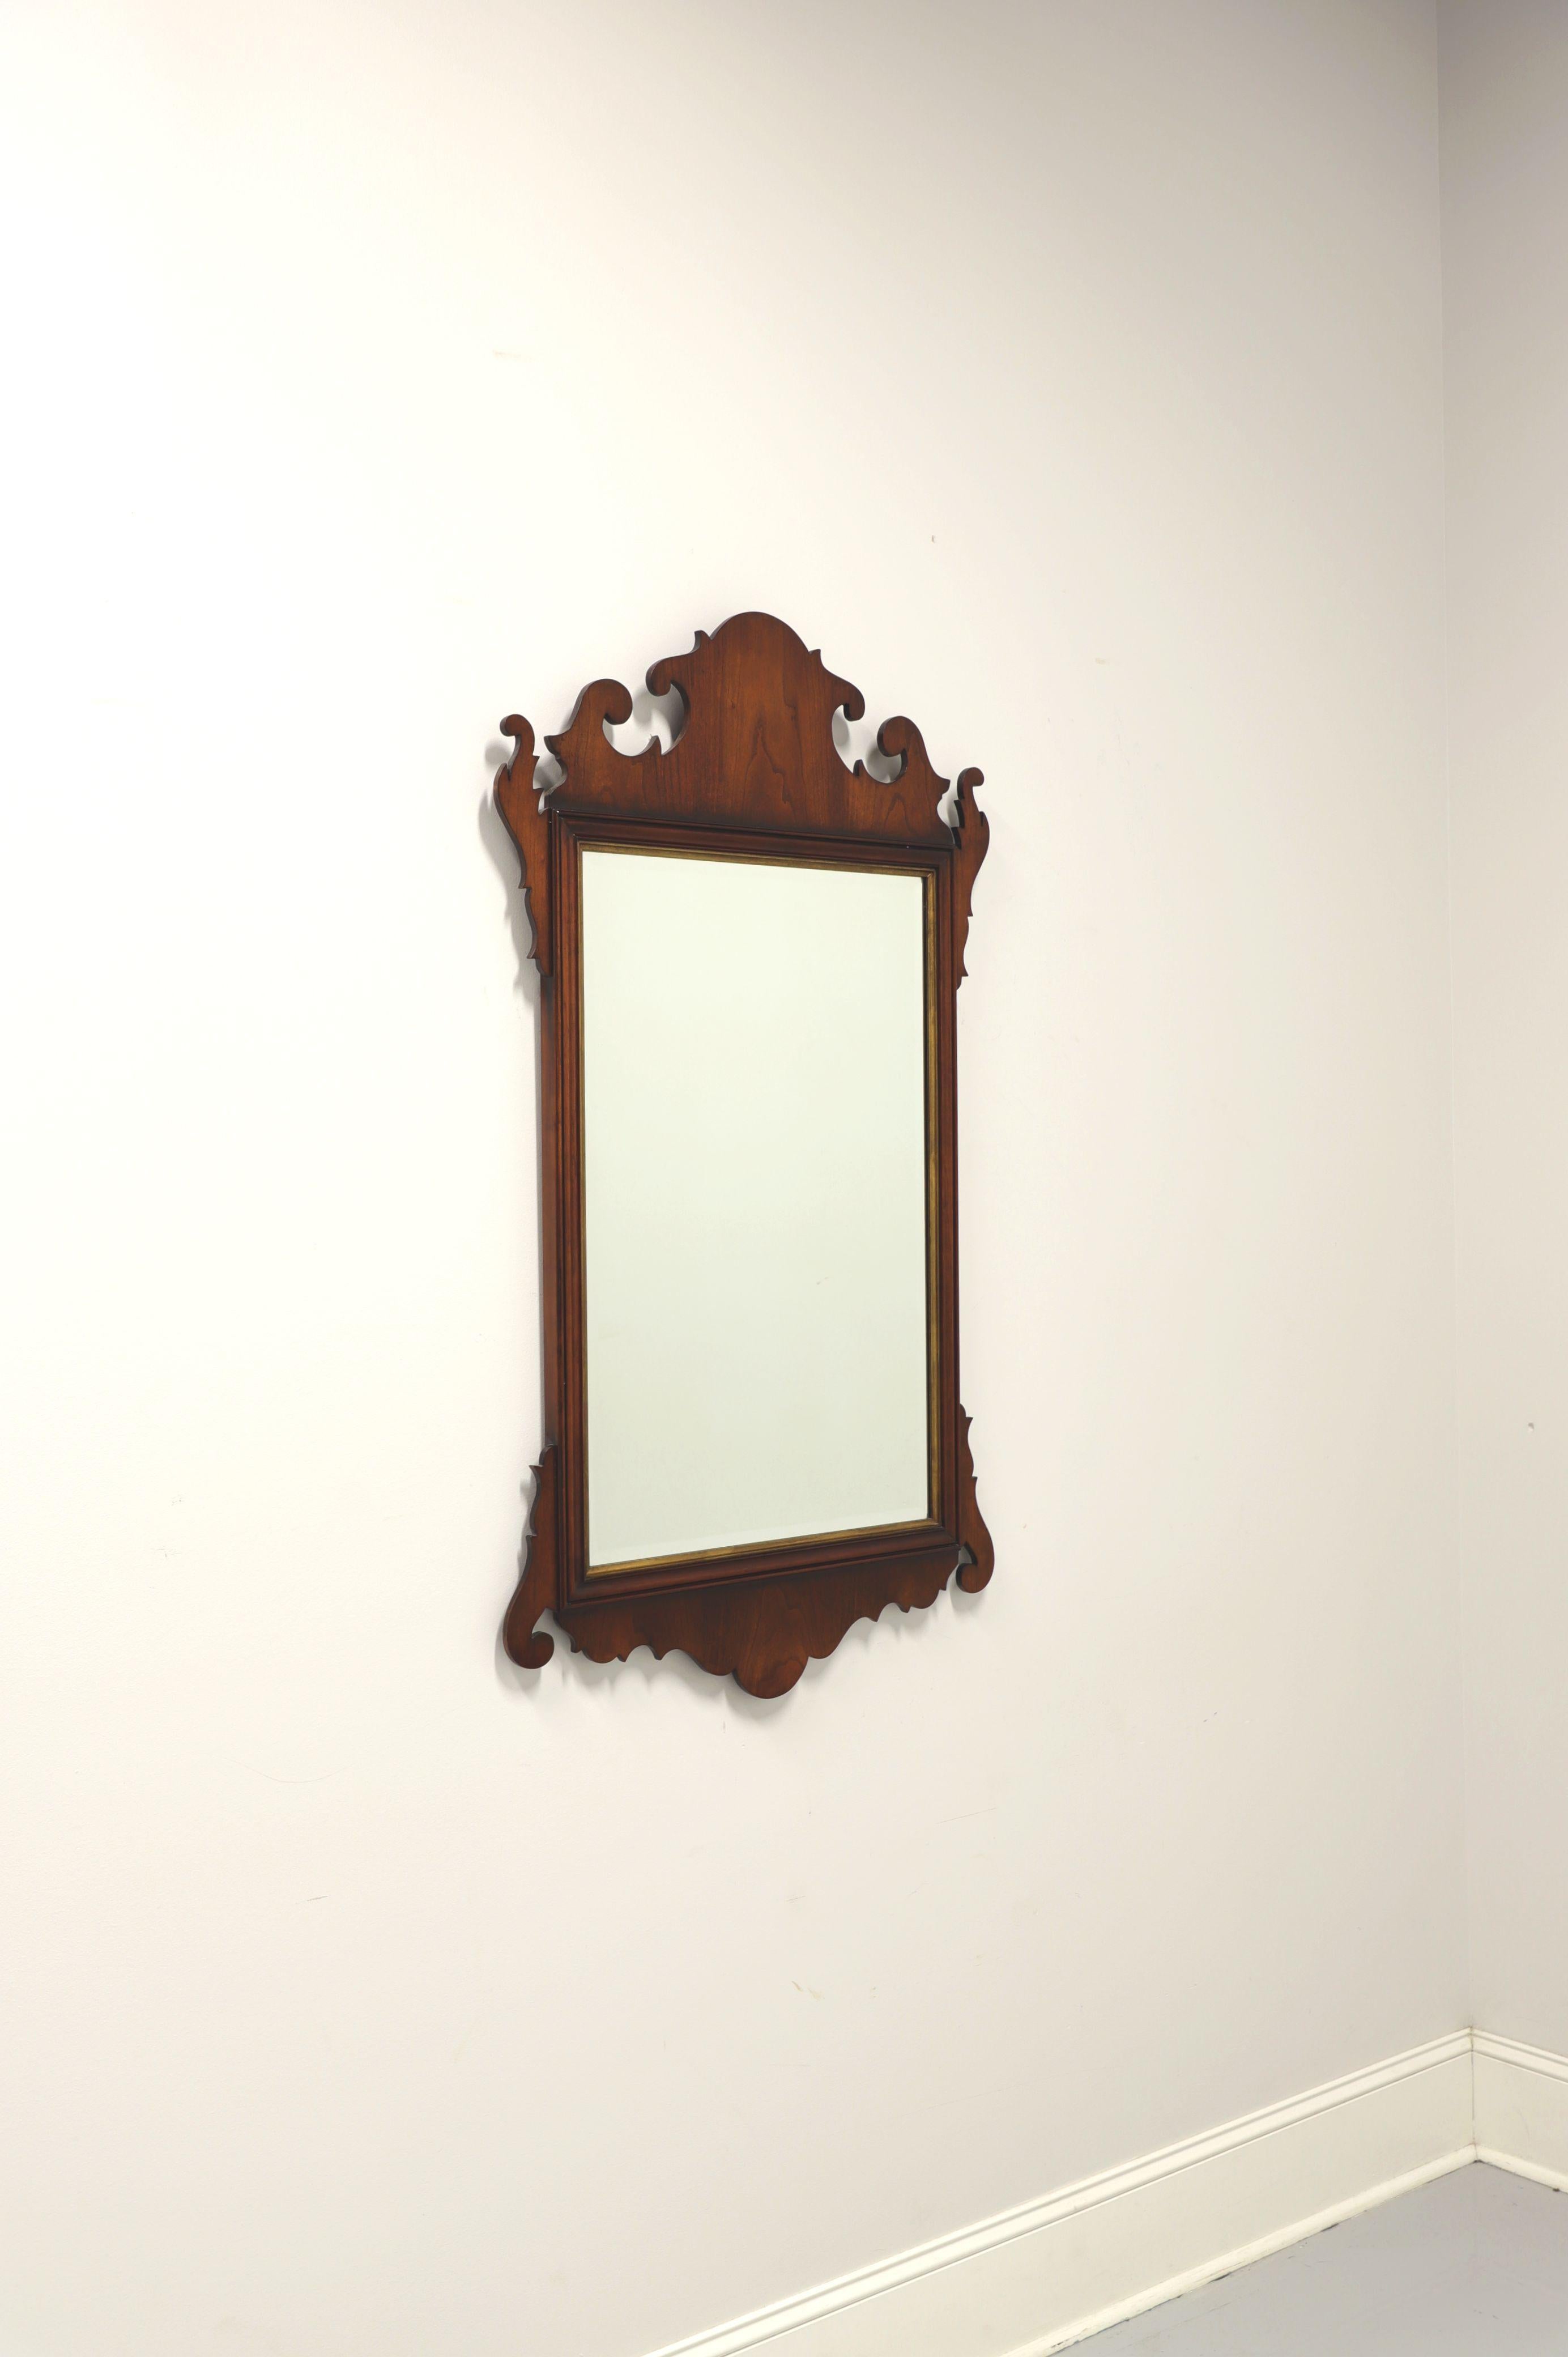 A Chippendale style wall mirror by Statton, with their Centennial finish to frame. Mirror glass, cherry wood frame with gold trim, decorative carving to top and bottom. Made in the USA, circa 1982.

Style #:  1422

Measures: 28.25W 1.25D 49.25H,